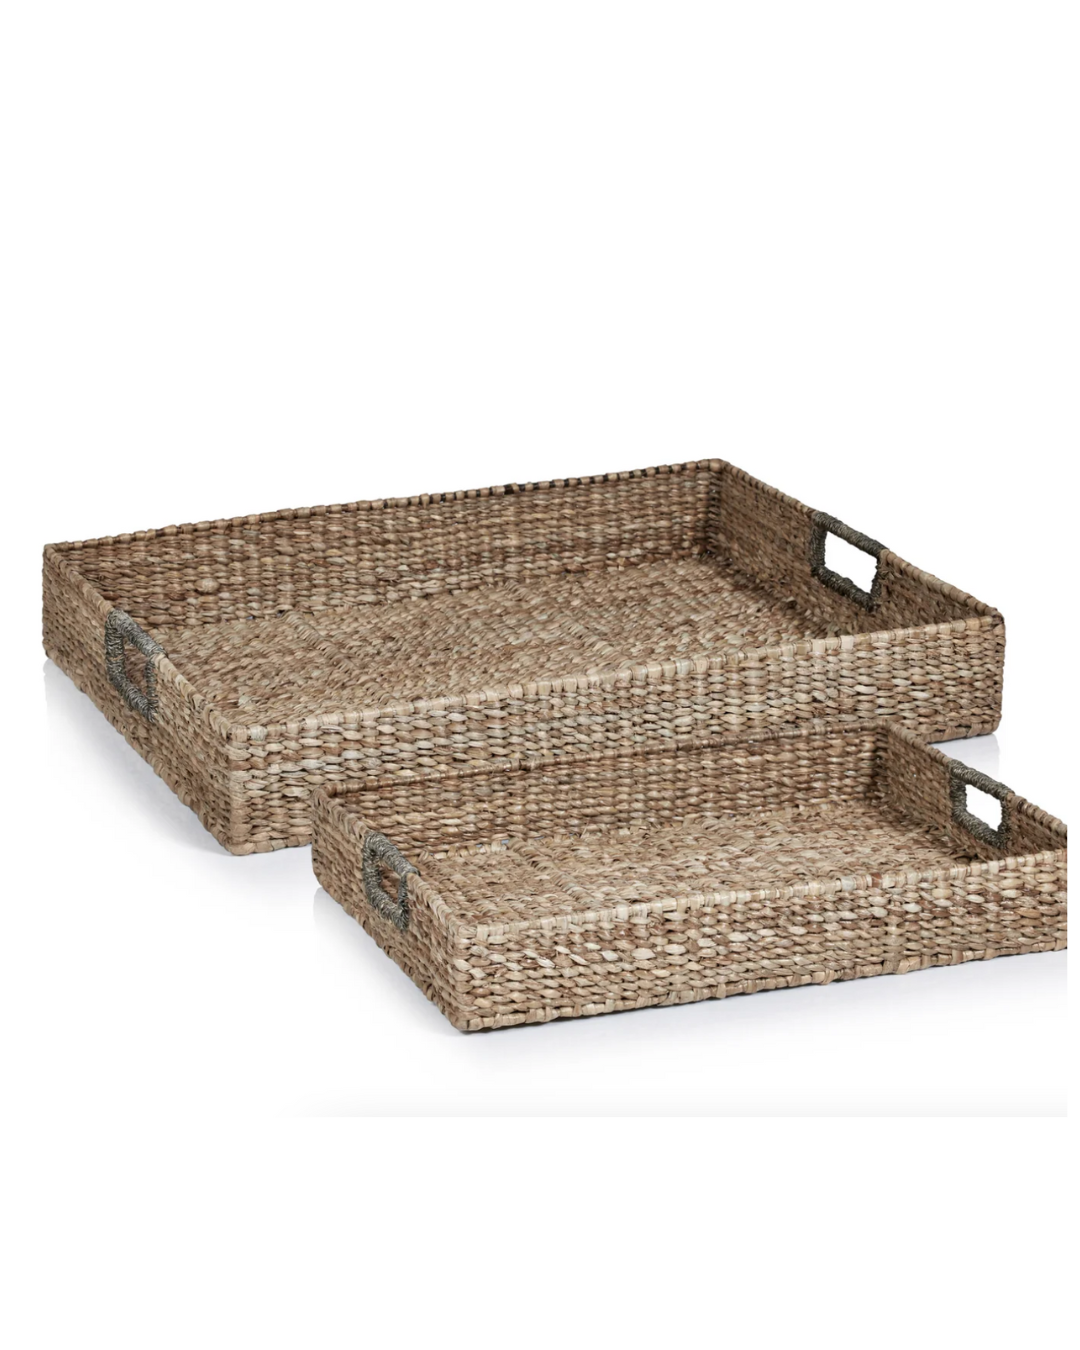 Two rectangular woven Zodax seagrass trays with side cut-out handles, stacked on top of each other, against a white background, perfect for a bungalow in Scottsdale Arizona.